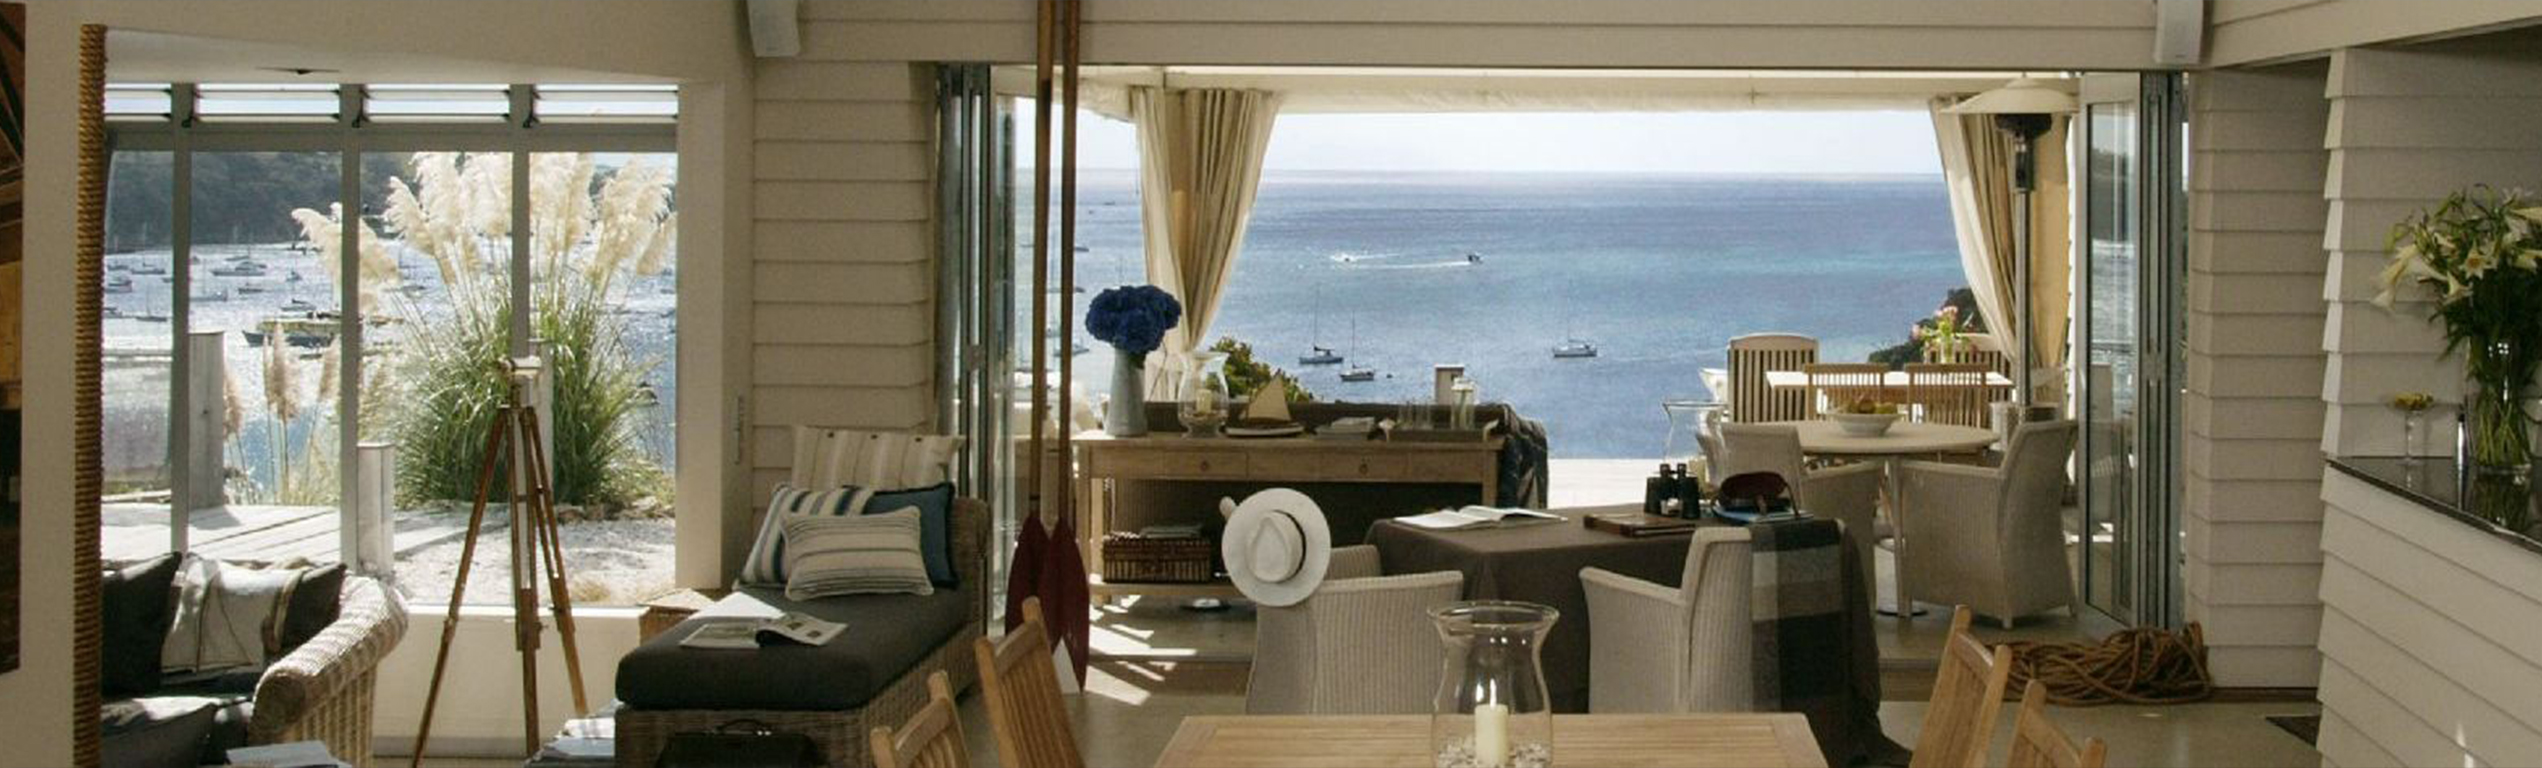 Elevated ocean views at The Boatshed Boutique Accommodation Waiheke Island.